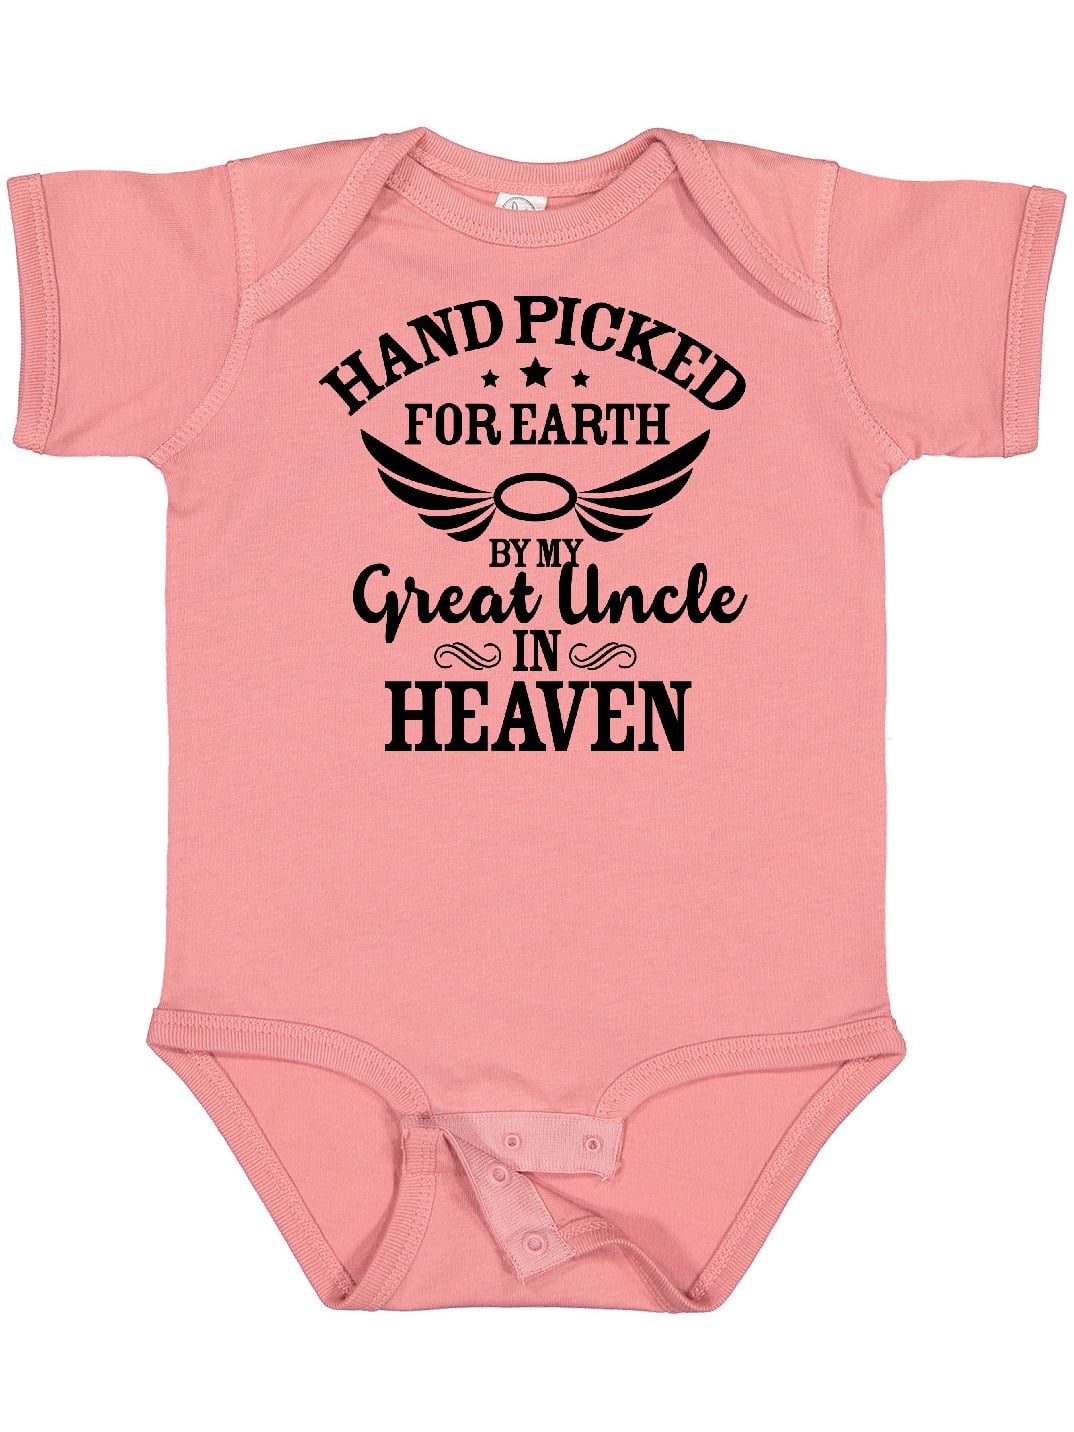 Handpicked For Earth By Uncle Auntie Heaven Baby Girl Boy Bodysuit Vest 290-291 